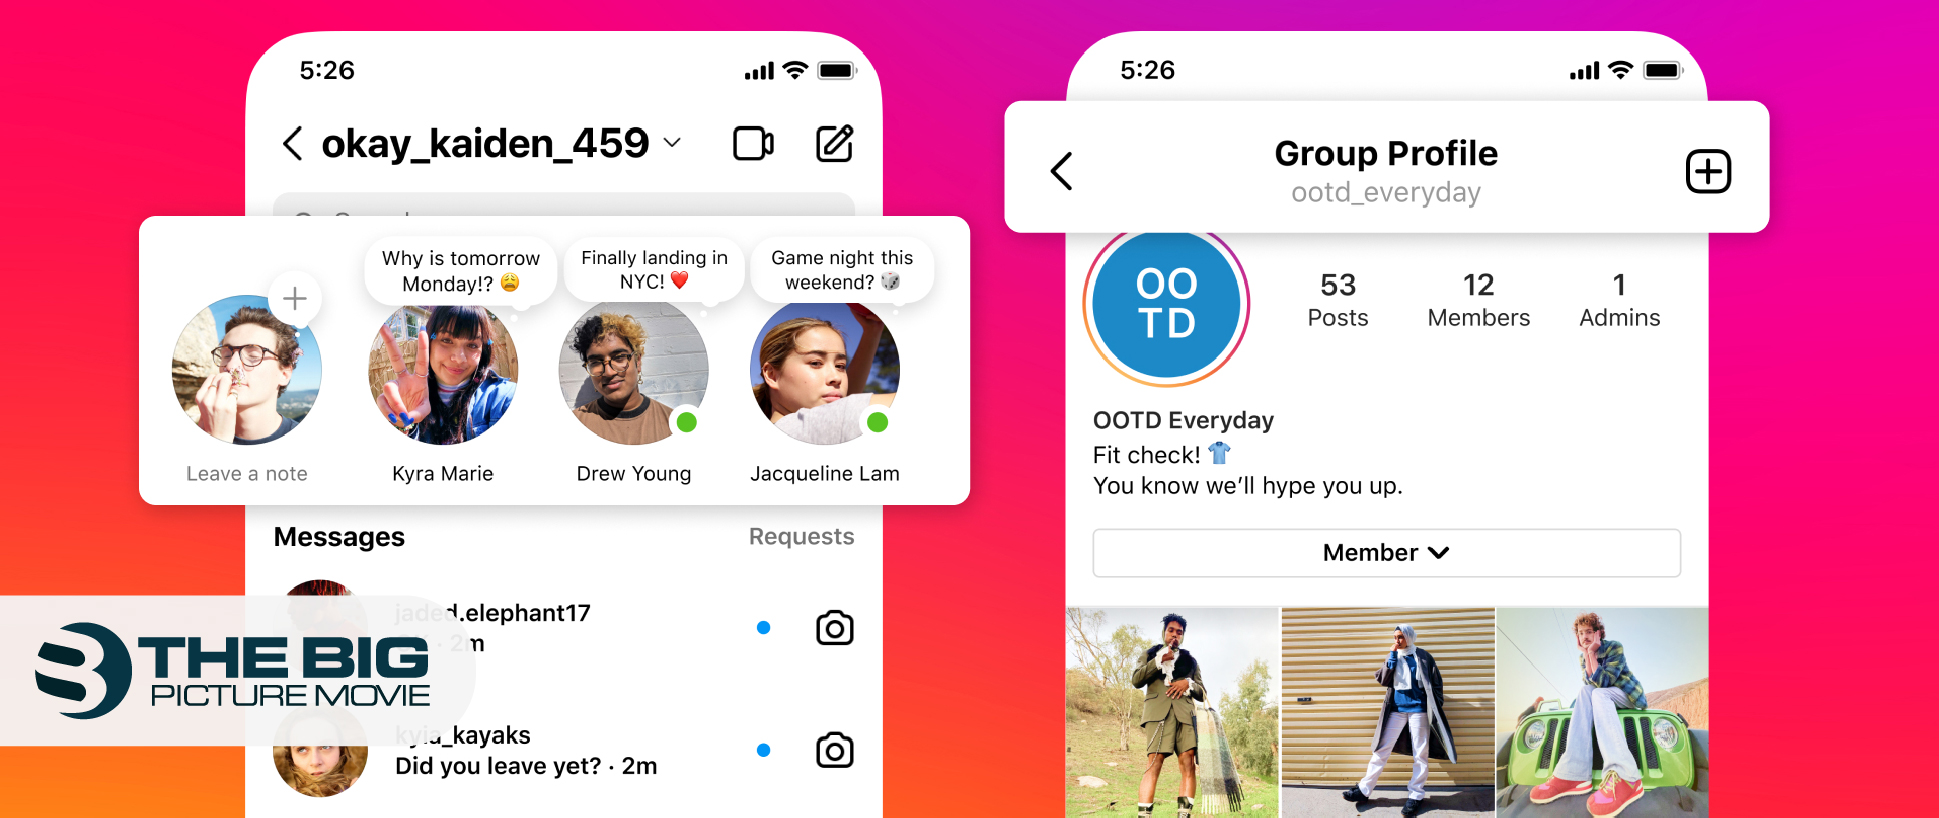 Instagram Now Lets you Save Posts into a Shared Album with Friends